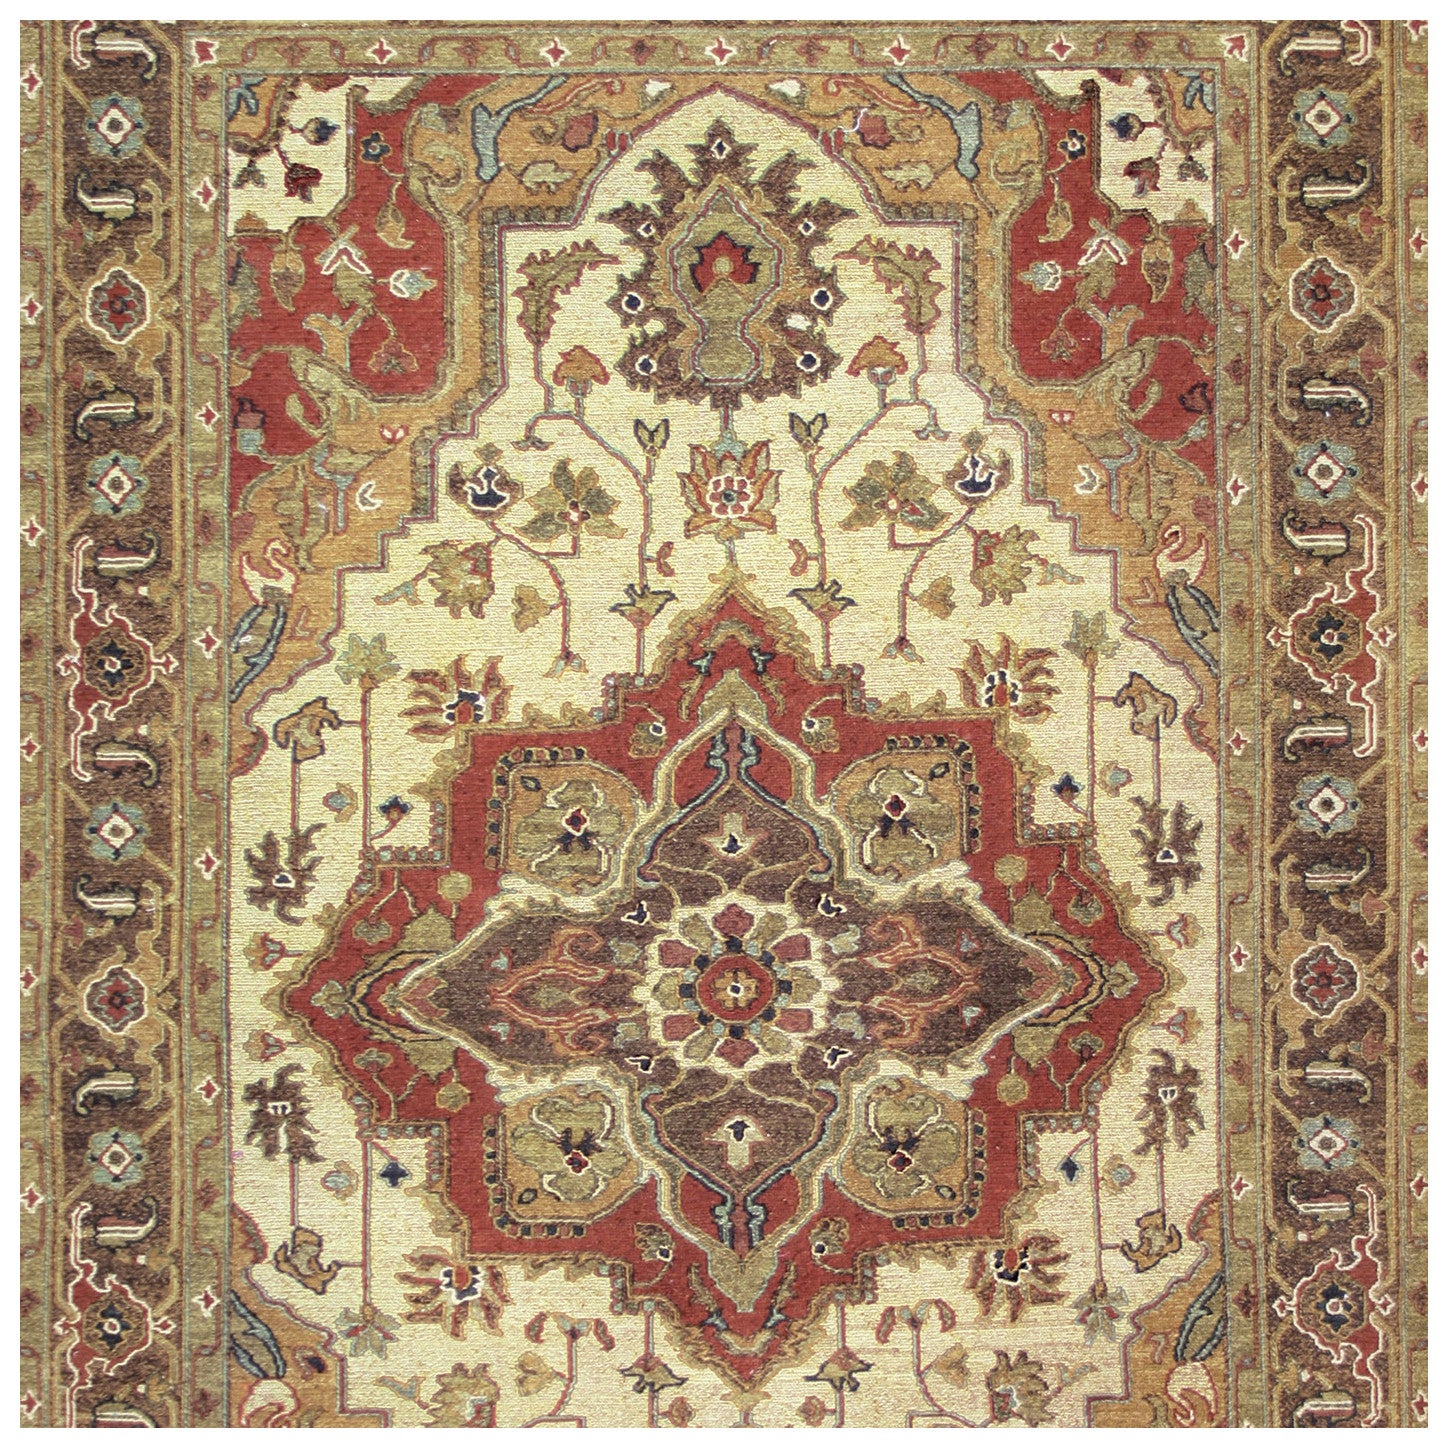 Traditions Rustic Rug